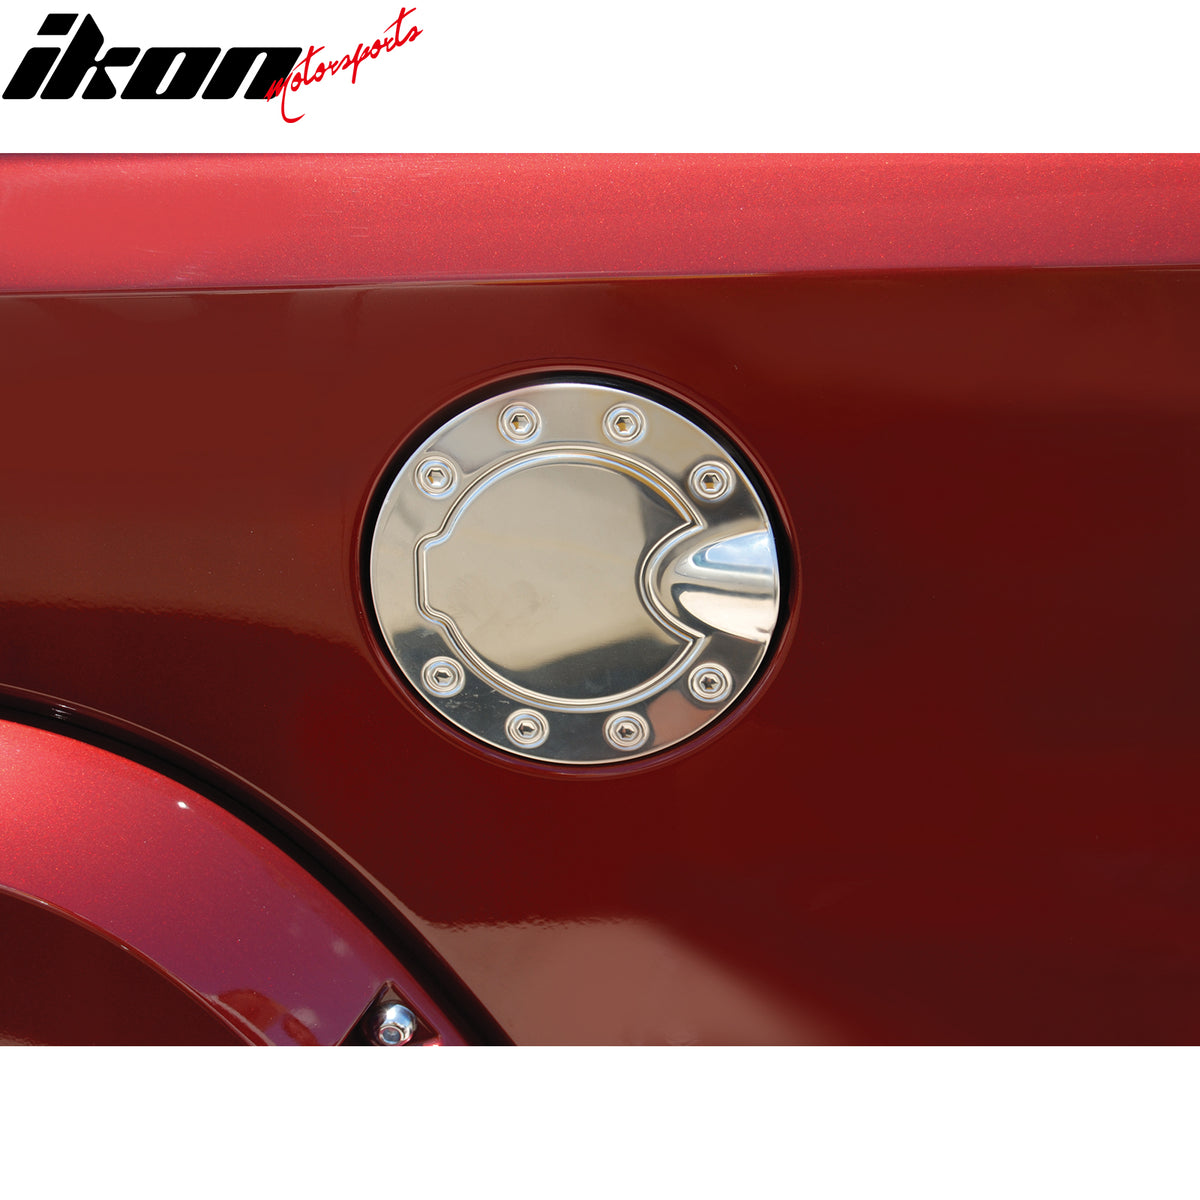 IKON MOTORSPORTS, Fuel Gas Door Cover Compatible With 2007-2012 Dodge Nitro & 2007-2009 Jeep Grand Cherokee, Mirror Finish Stainless Steel Exterior Side Fuel Tank Gas Cap Cover Decoration Accessories